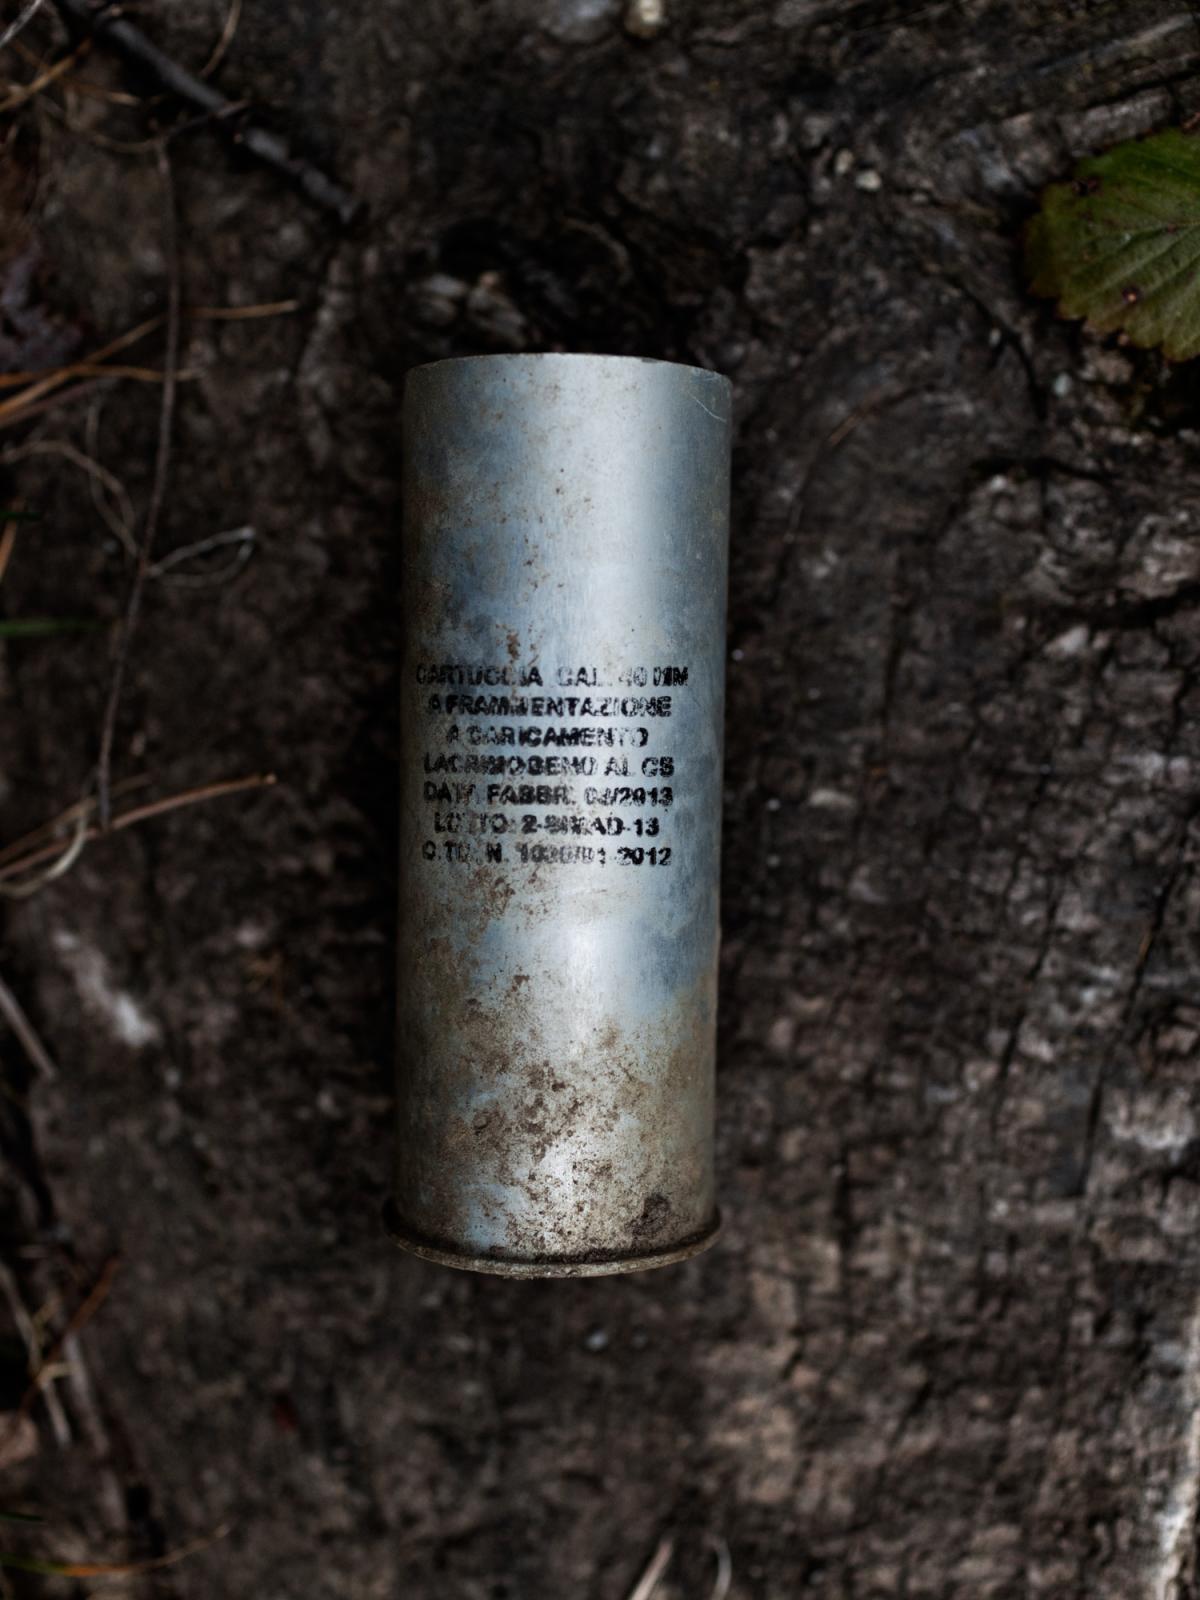 We are still dreaming  - A tear gas fired by the police outside the Chiomonte...